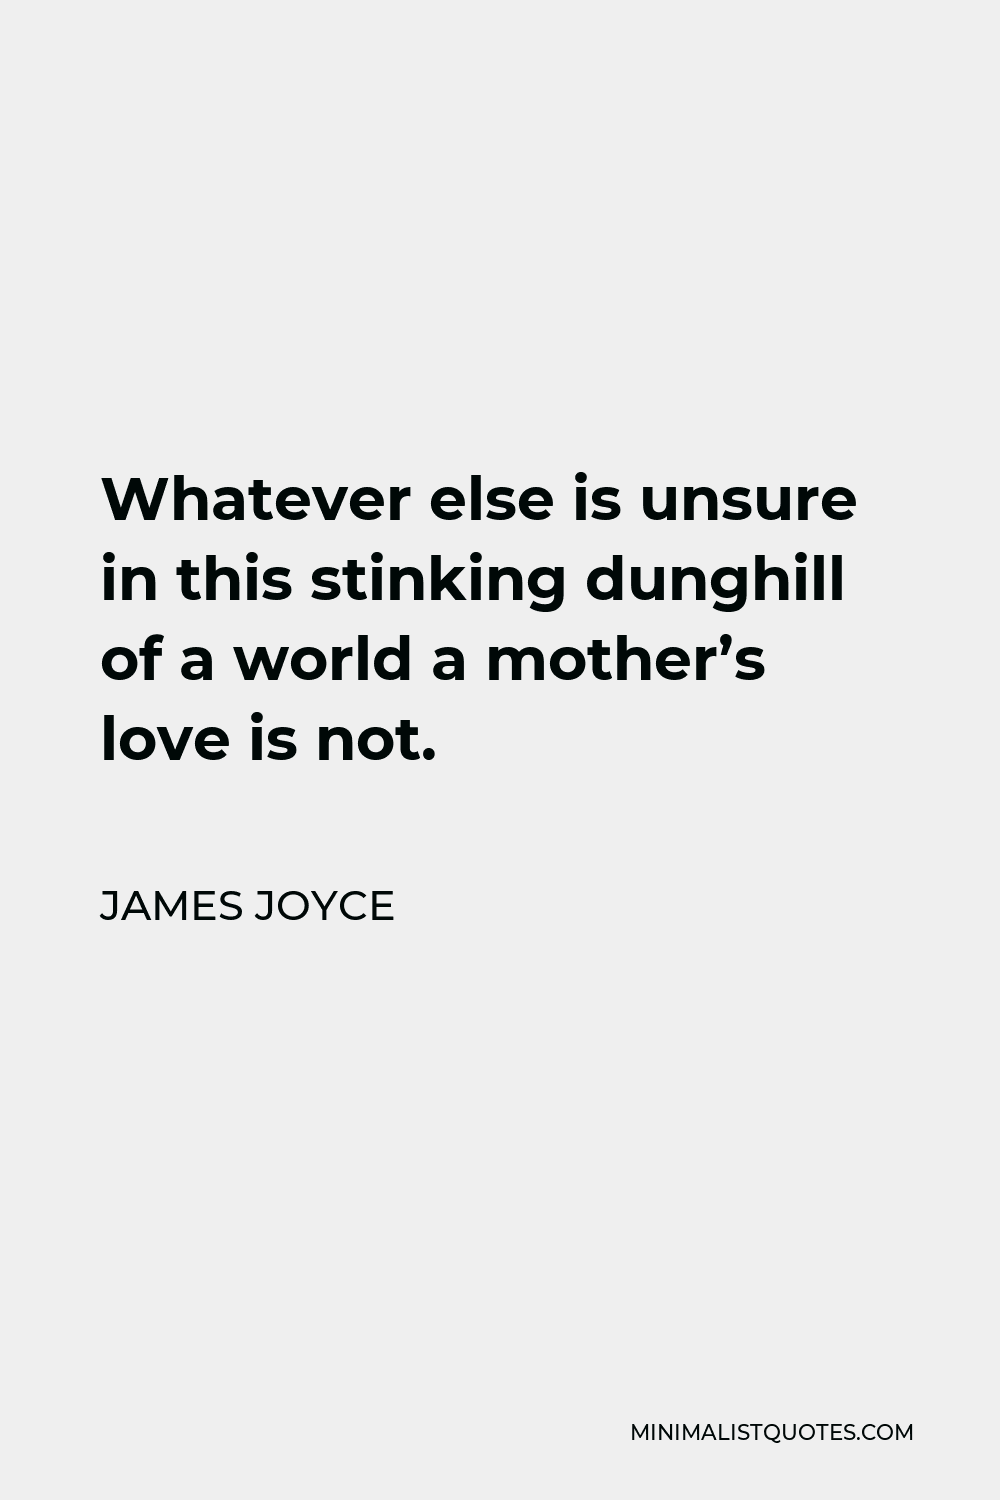 James Joyce Quote - Whatever else is unsure in this stinking dunghill of a world a mother’s love is not.